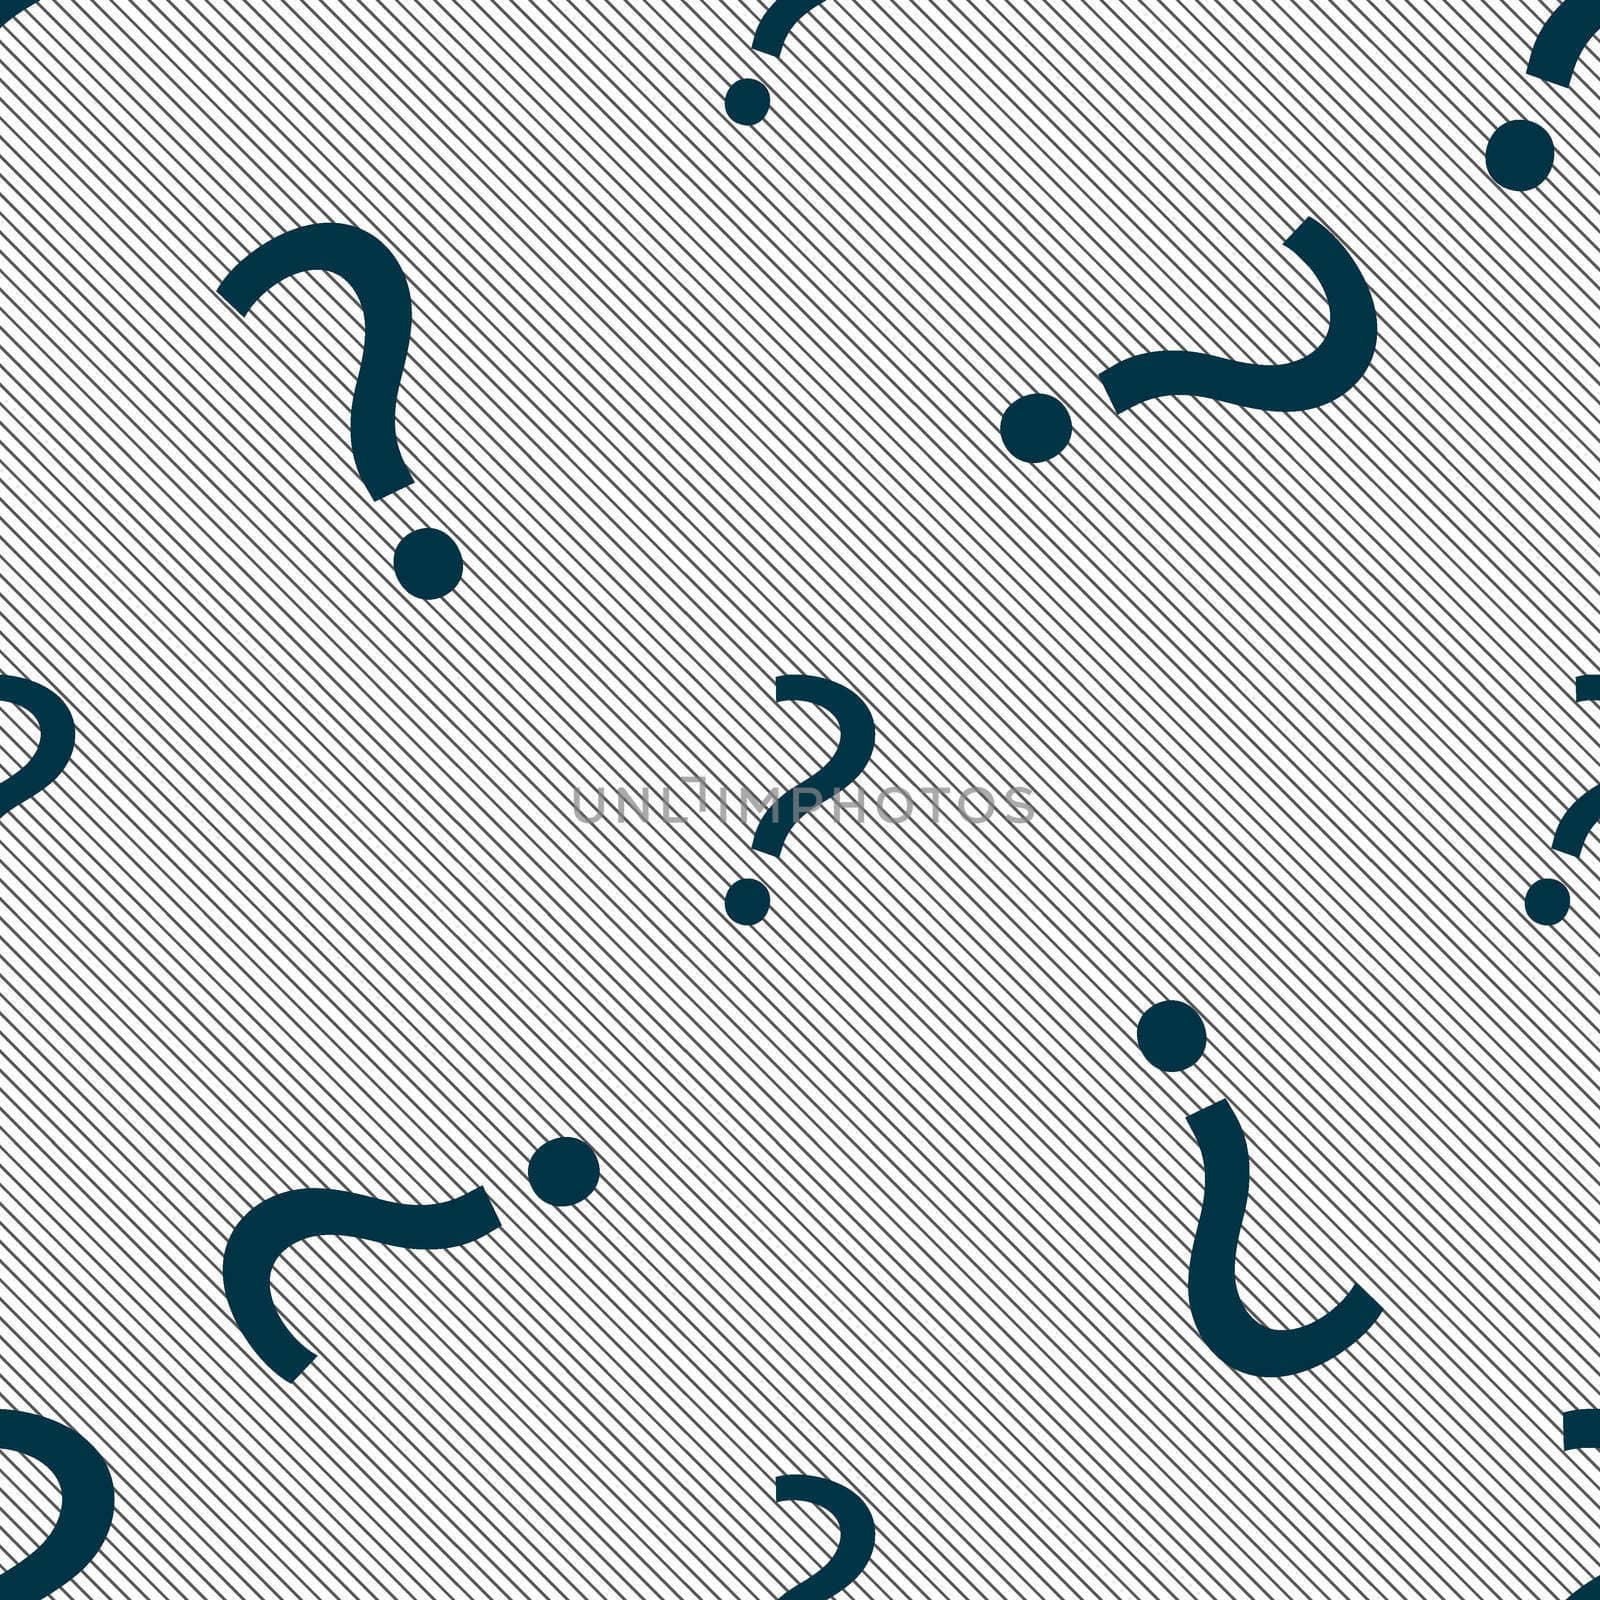 Question mark sign icon. Help symbol. FAQ sign. Seamless pattern with geometric texture. illustration